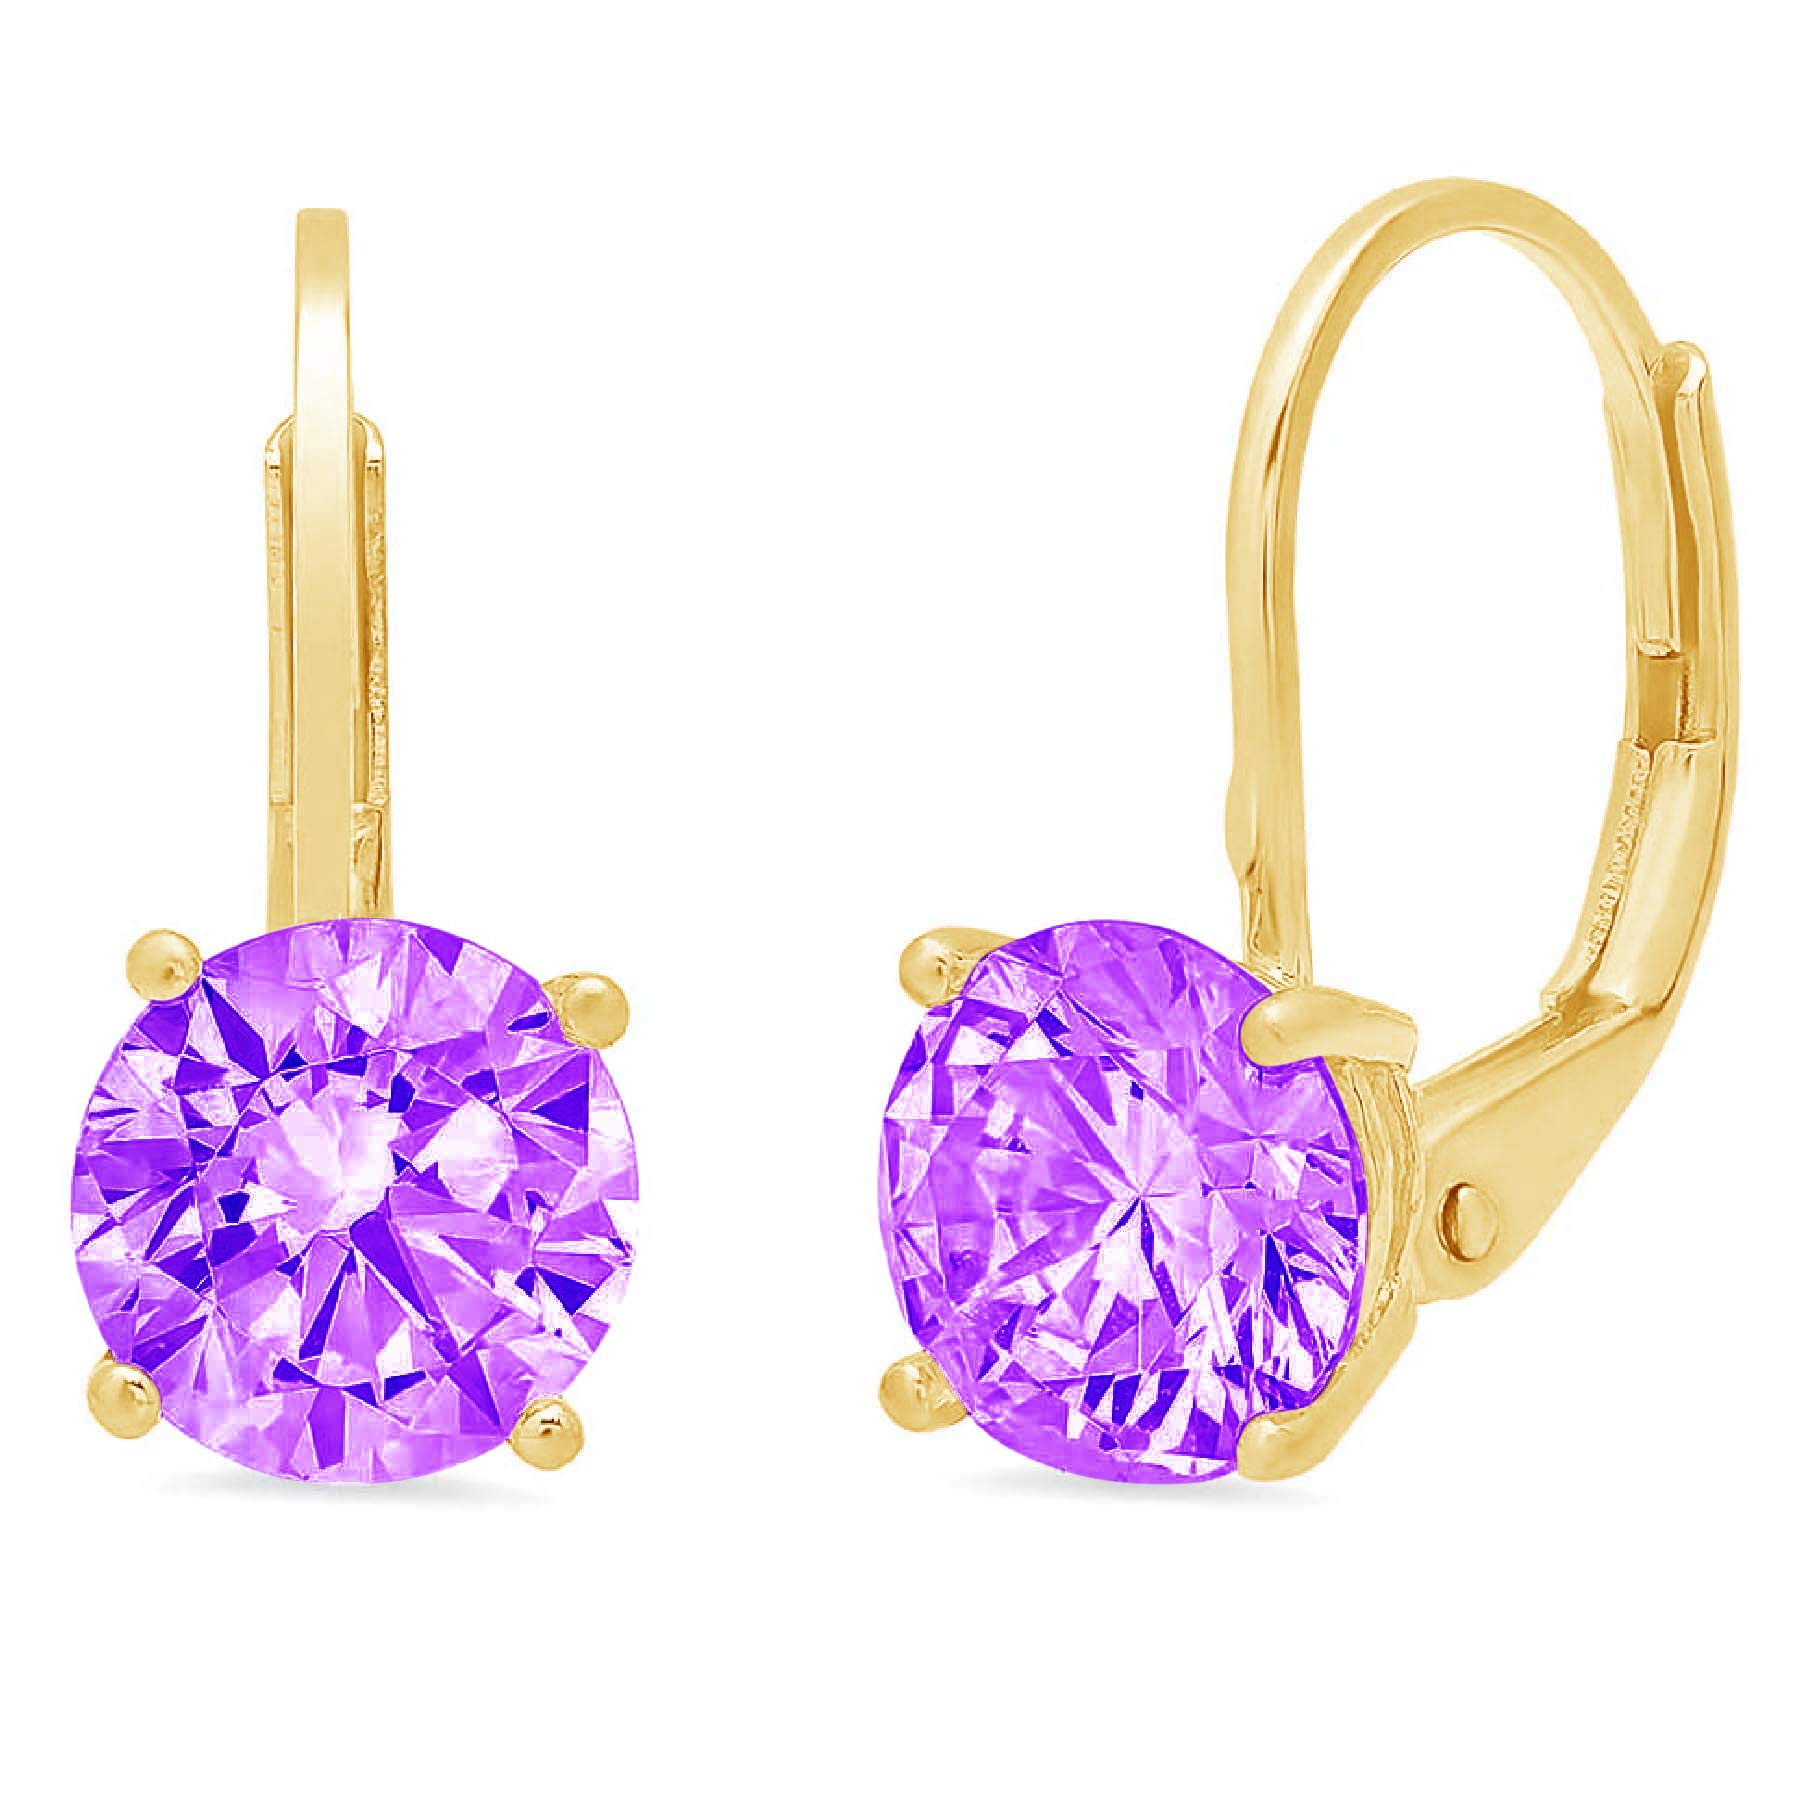 3.0 ct Round Cut ideal VVS1 Conflict Free Gemstone Solitaire Natural Purple Amethyst Designer Lever back Drop Dangle Earrings Solid 14k Yellow Gold